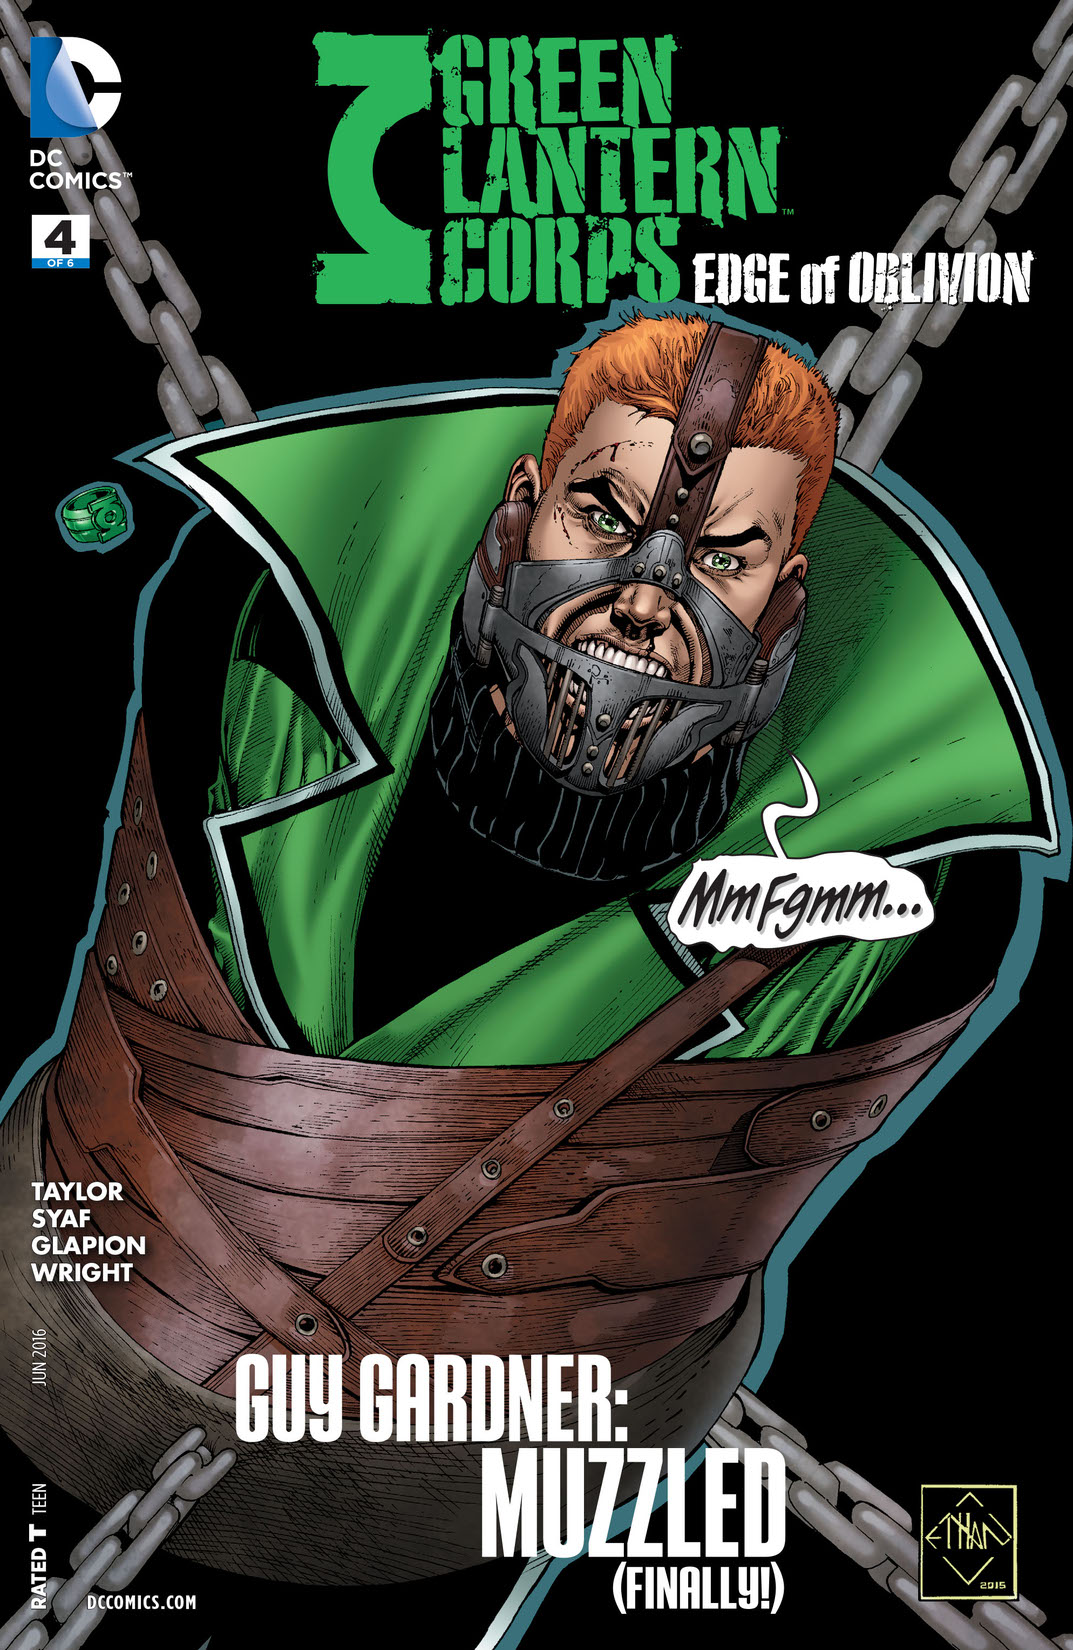 Green Lantern Corps: Edge of Oblivion #4 preview images